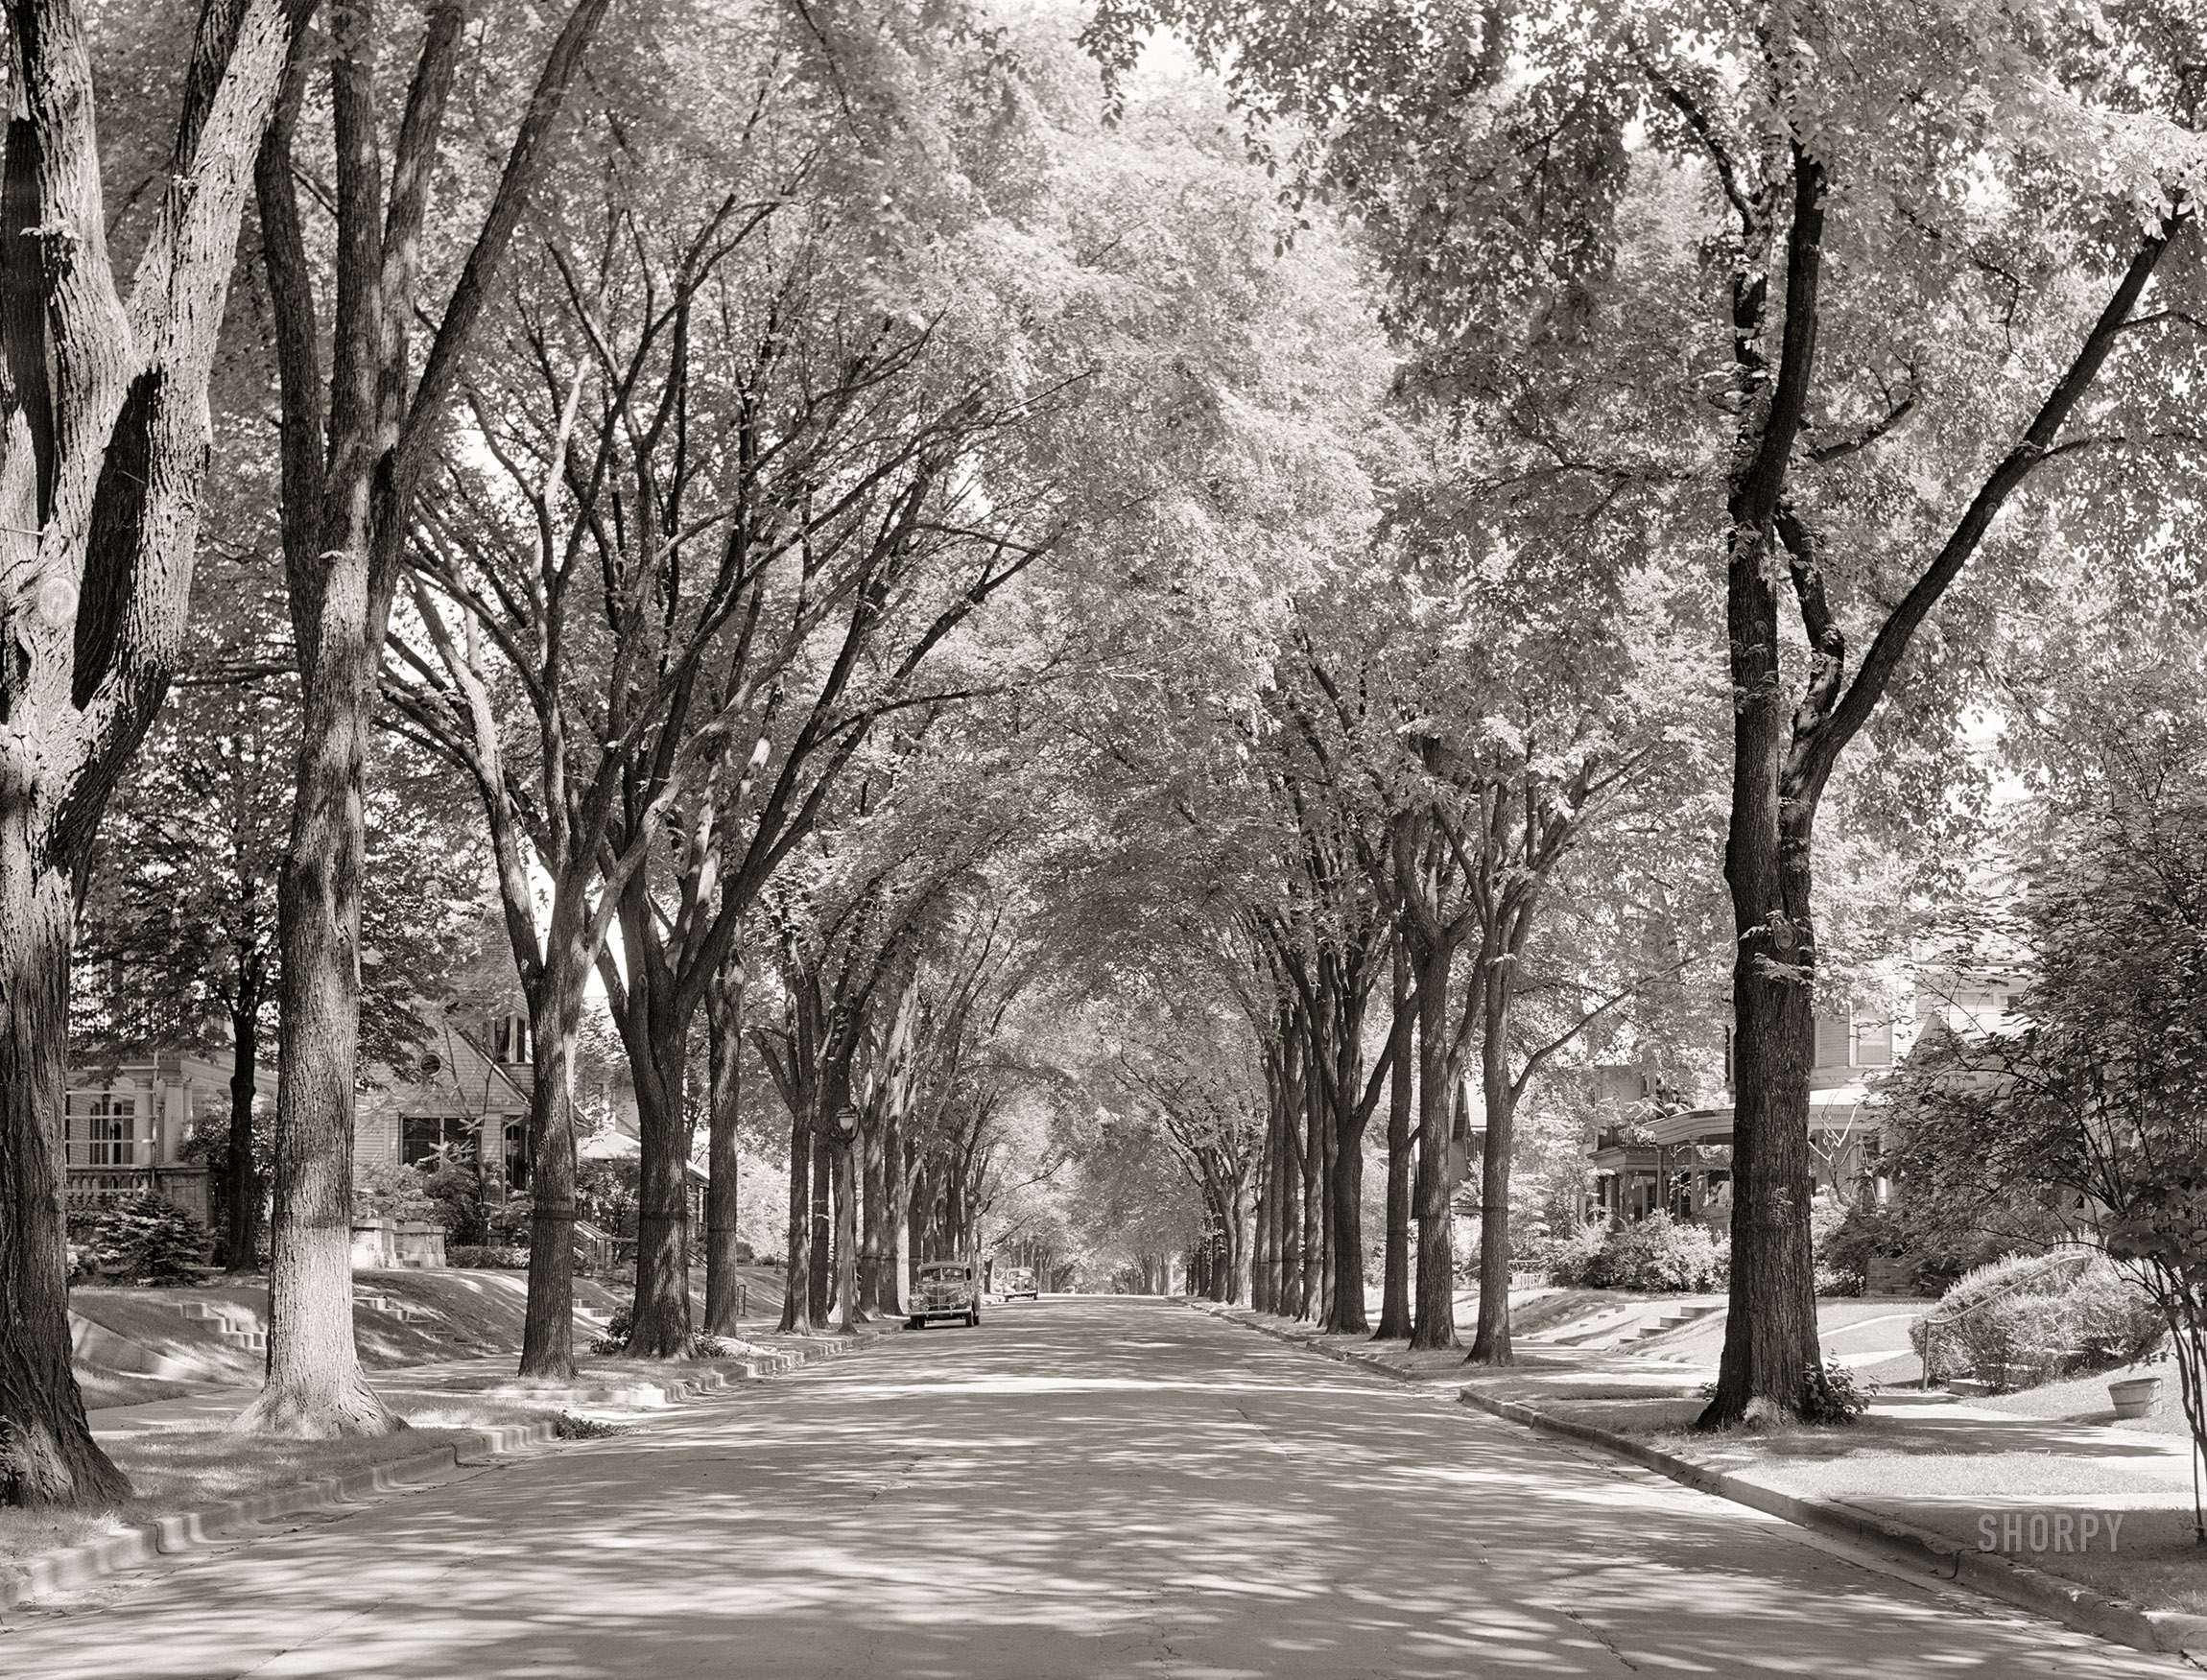 June 1941. "Residential section. Milwaukee, Wisconsin." Take the "tree" out of Elm Street and you're left with Elm St. Medium format acetate negative by John Vachon. View full size.